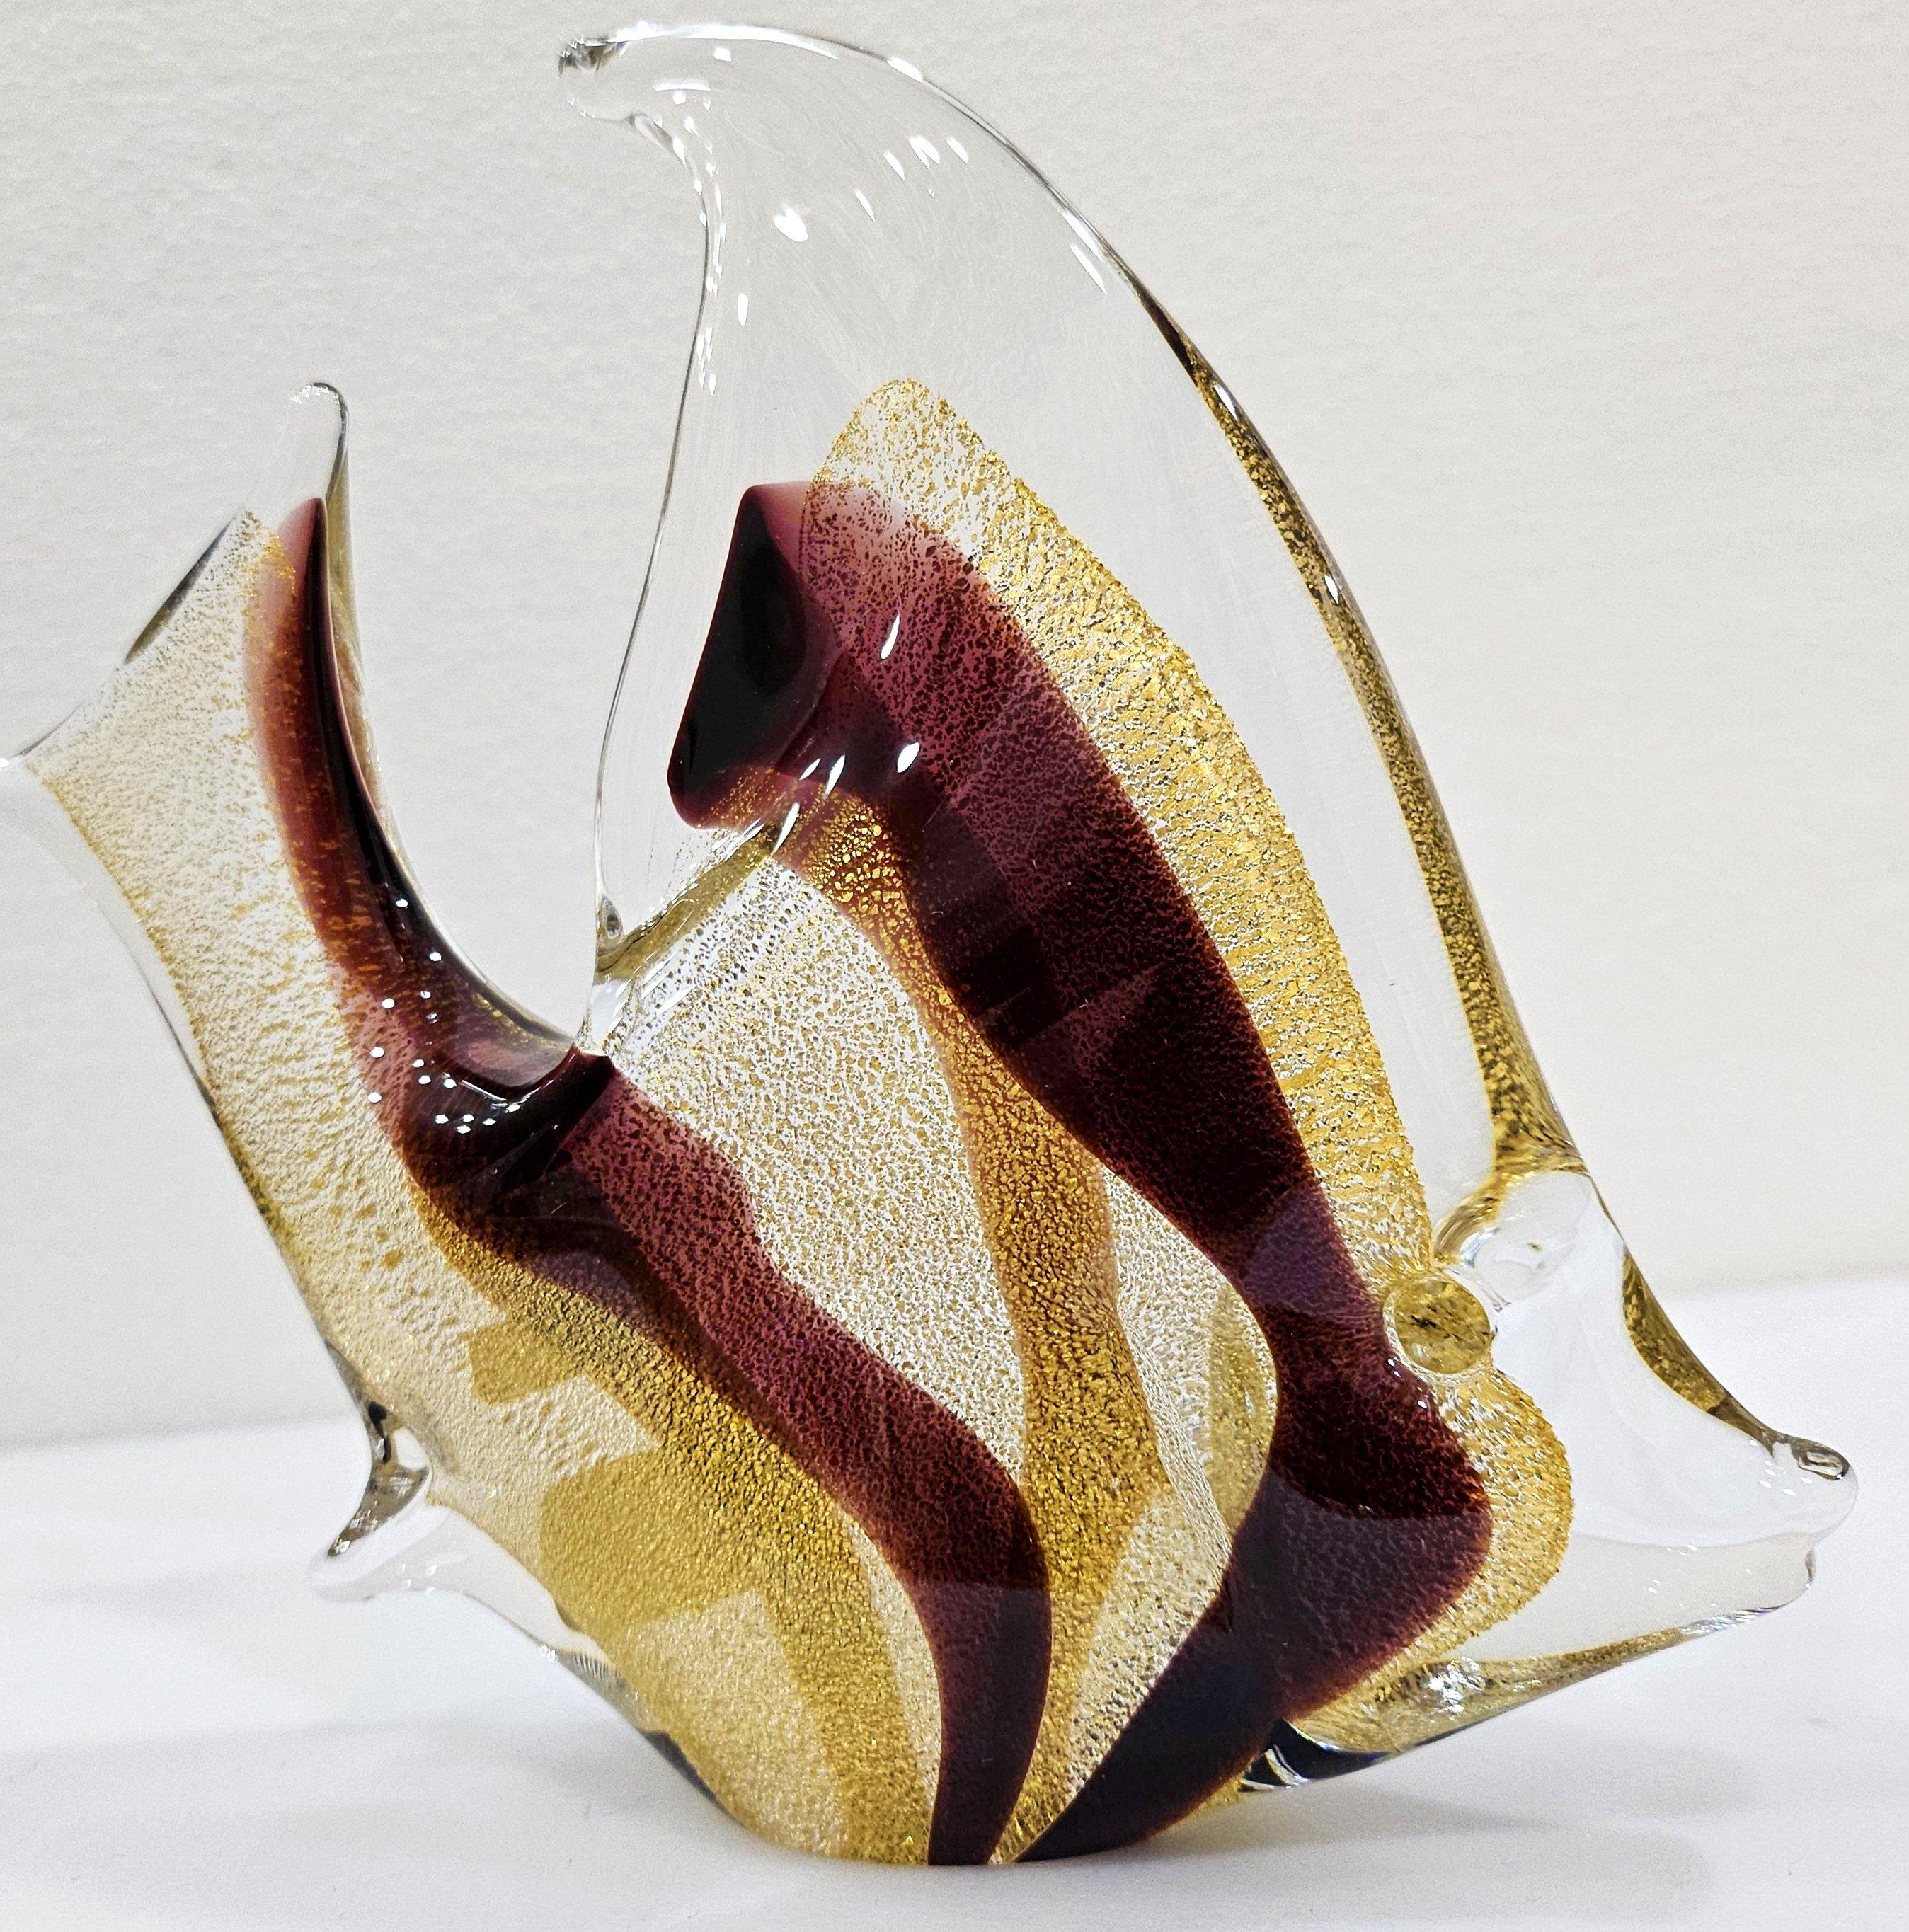 Signed, 24k gold infused, Glass Fish Sculpture by Josef Marcolin.
In addition to the signature on the bottom, the piece still has both of its original labels as well.  
In Murano glass work, fine gold dust inside the glass is called gold polveri.